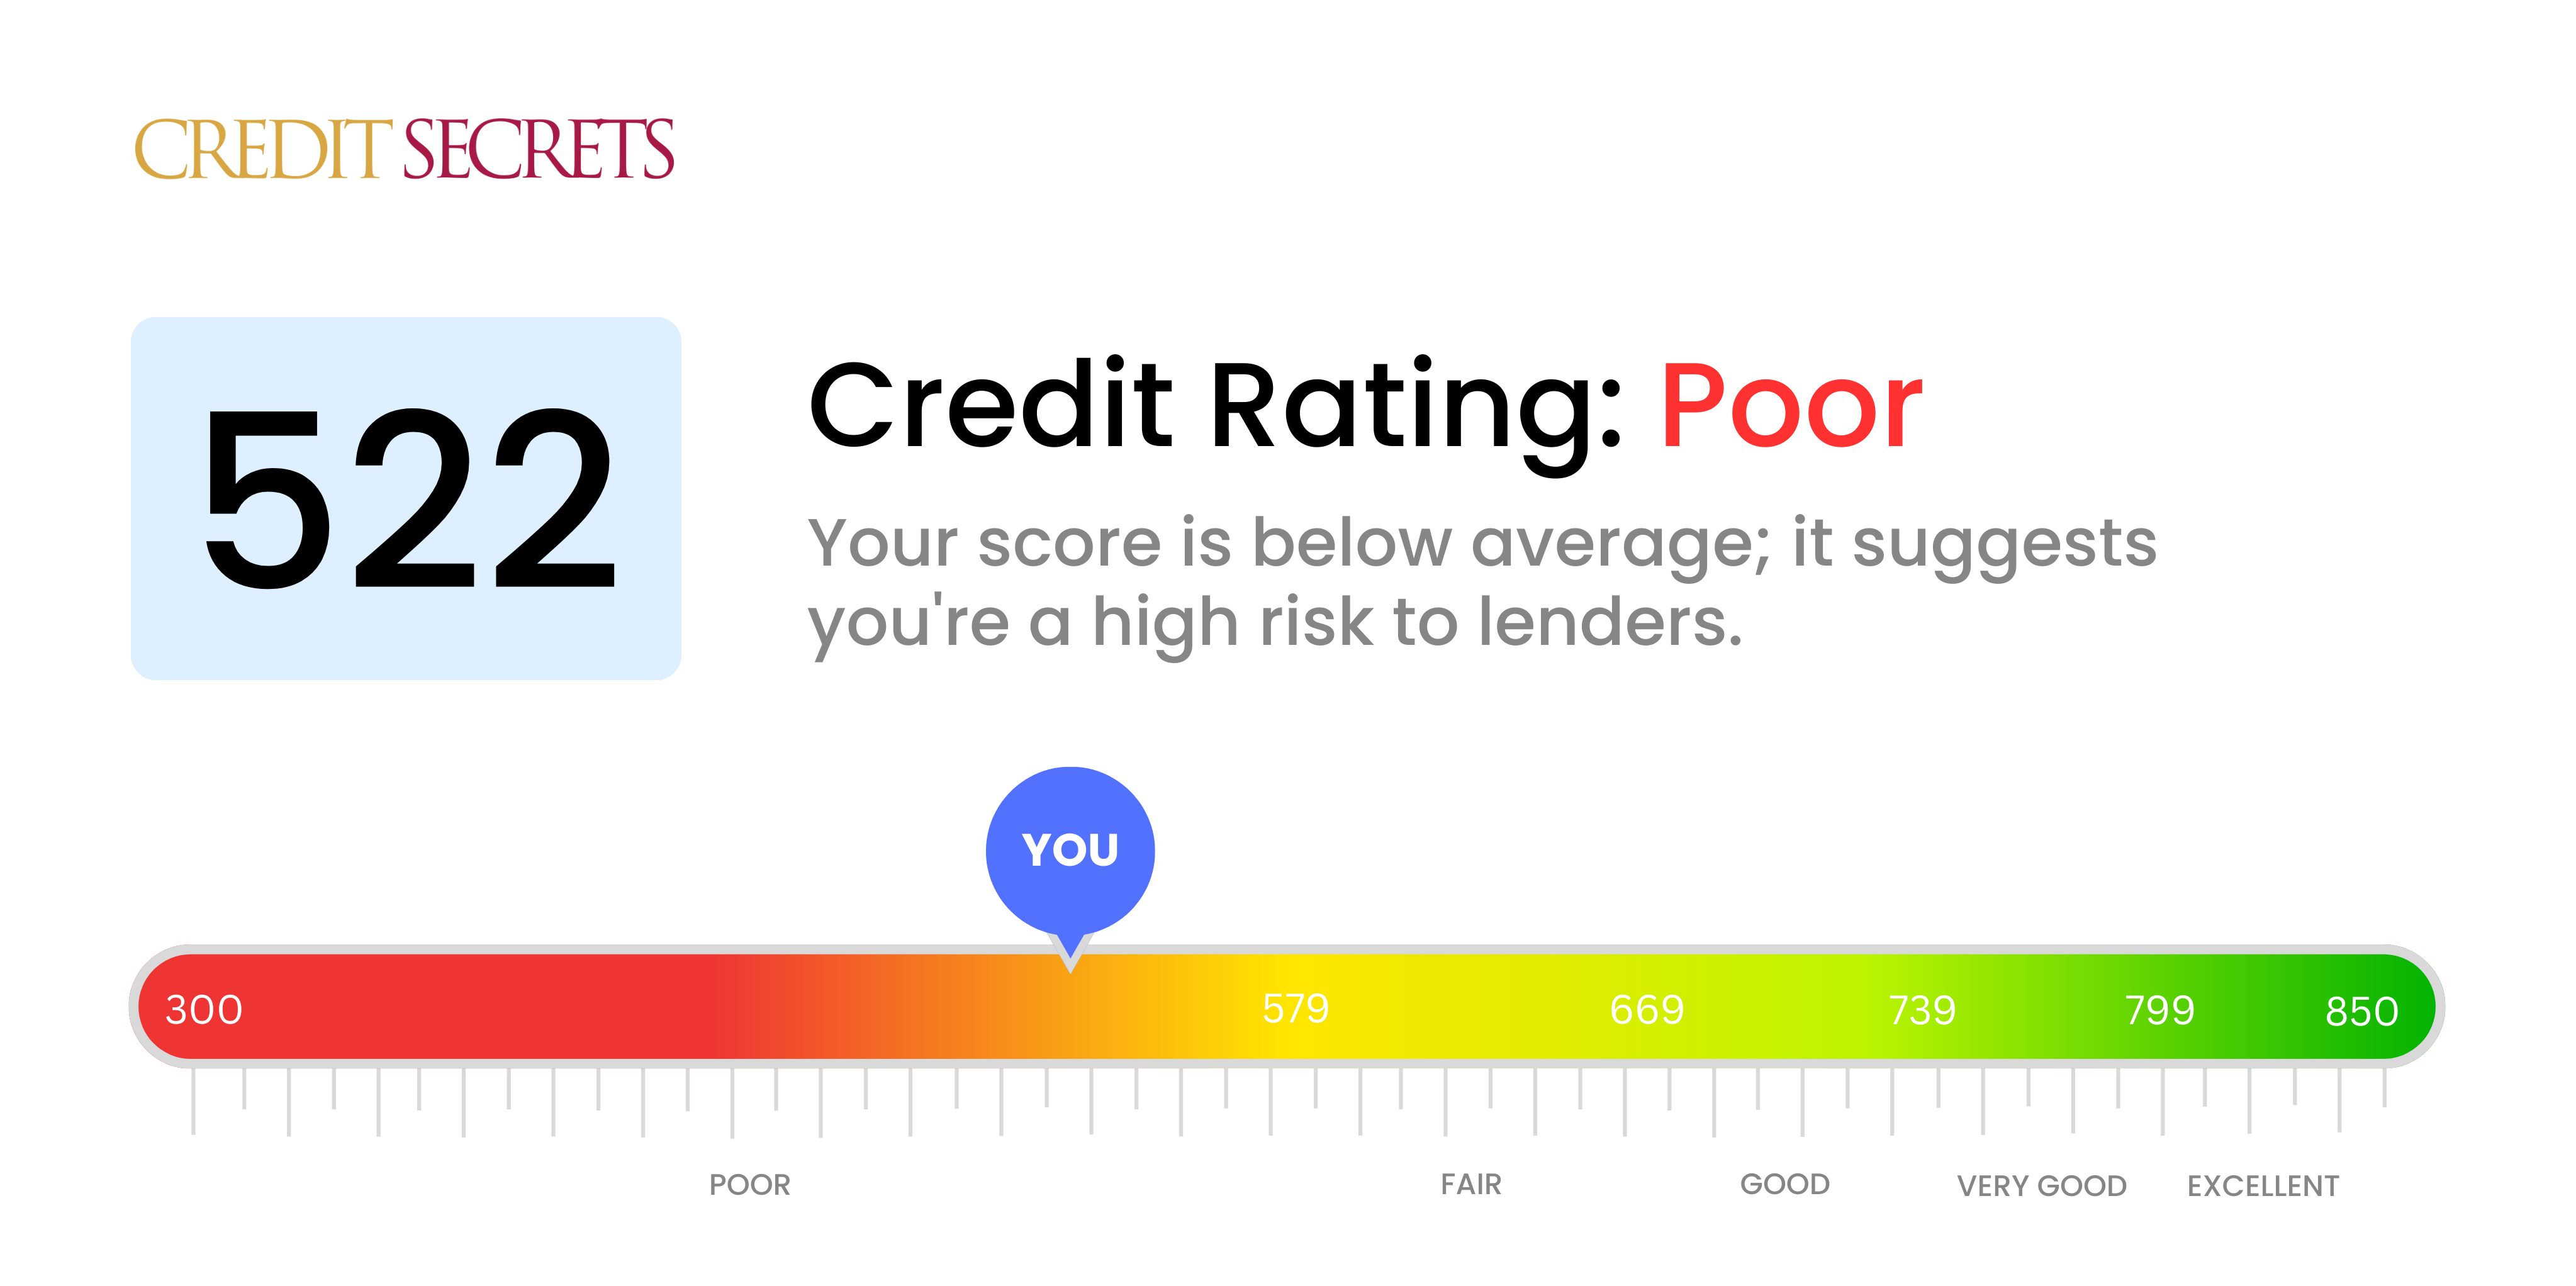 Is 522 a good credit score?